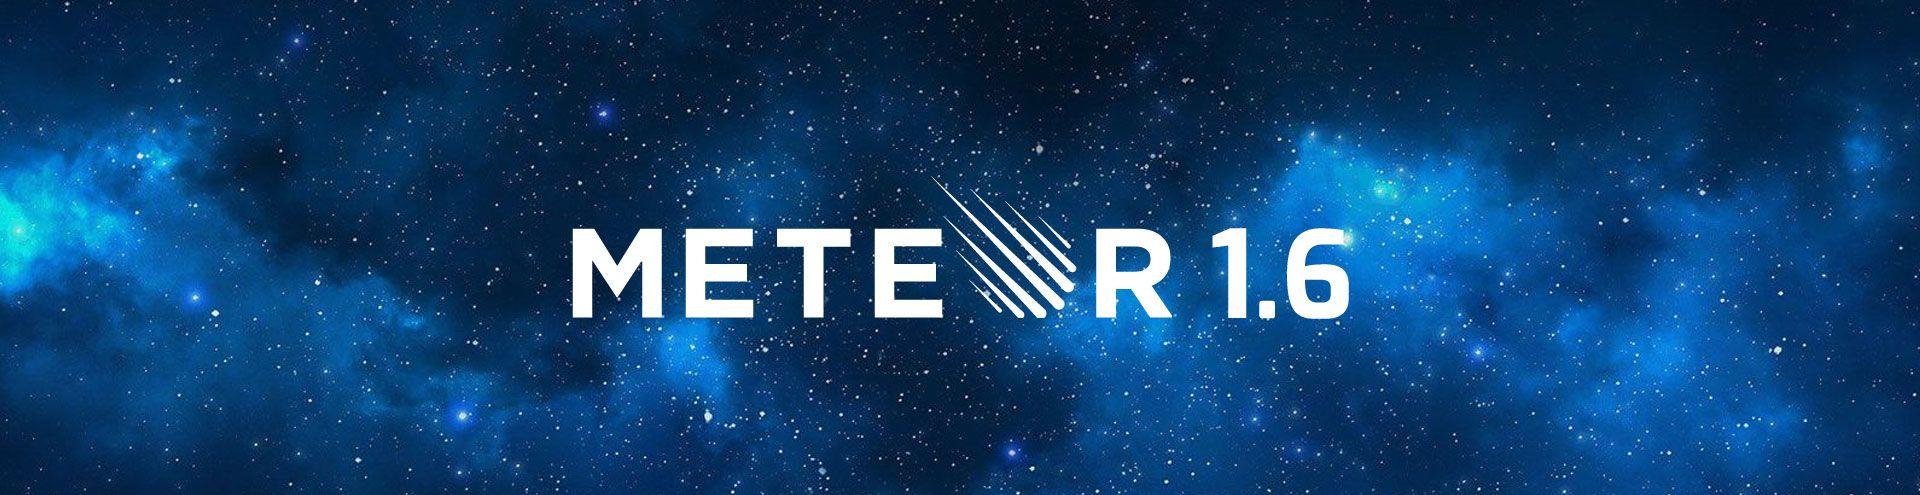 Meteor 1.6. Review: Benefits, Issues, and Examples